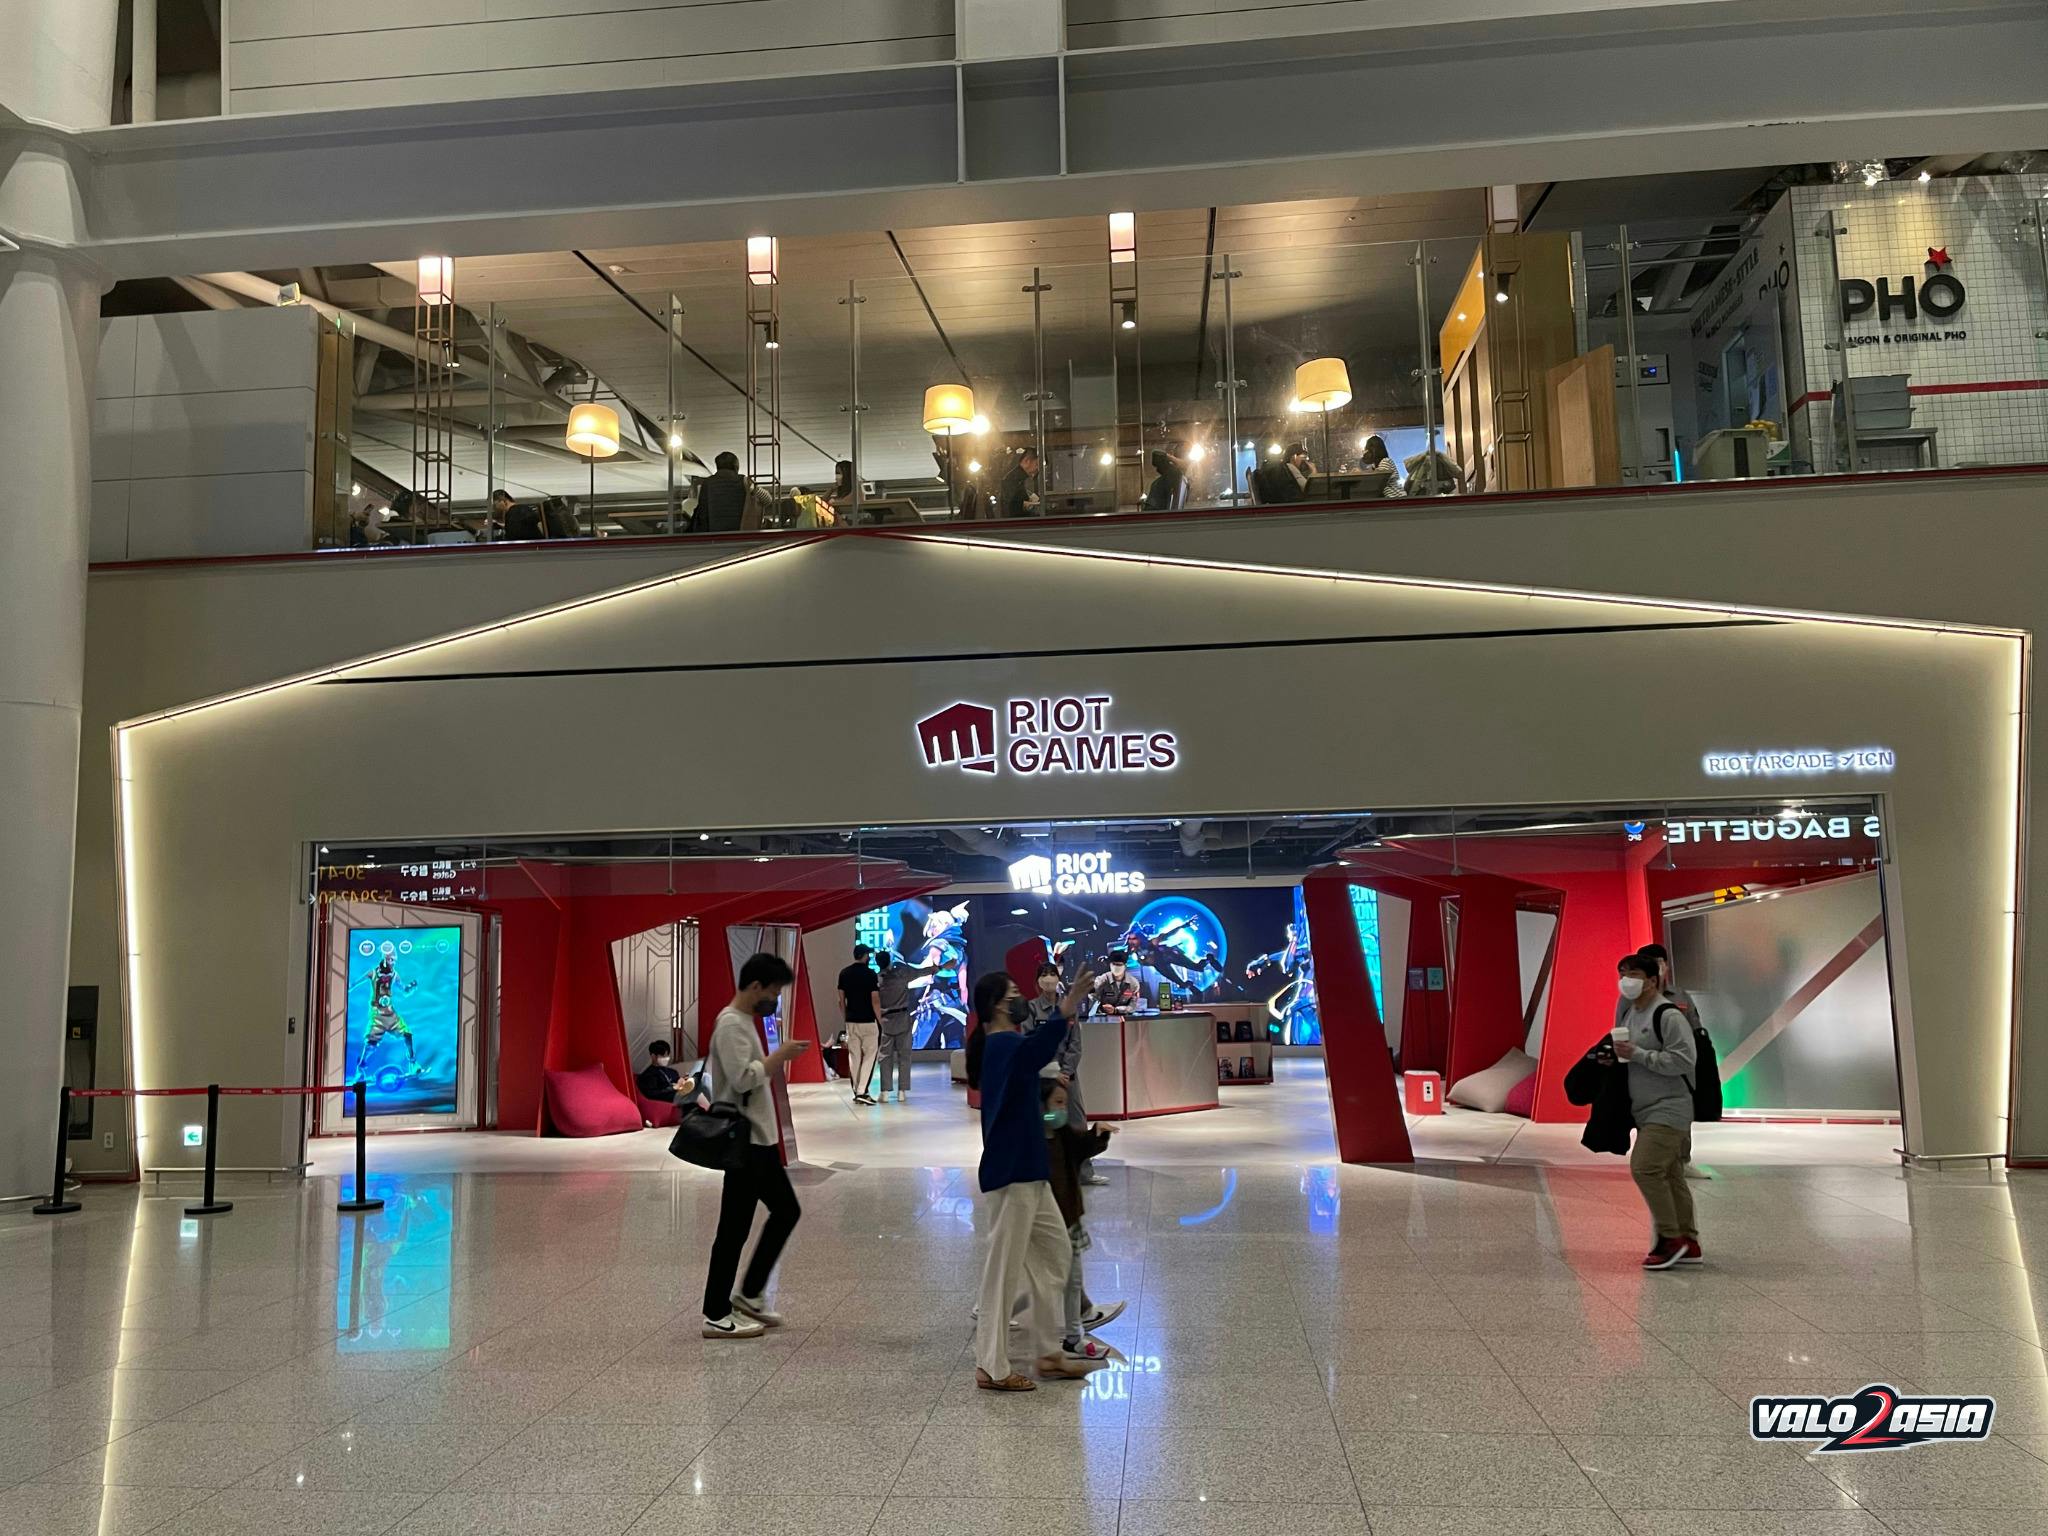 The exterior of the Riot Games Lounge at Incheon Airport<br>(Image via <a href="https://valo2asia.com/">Valo2Asia</a>)